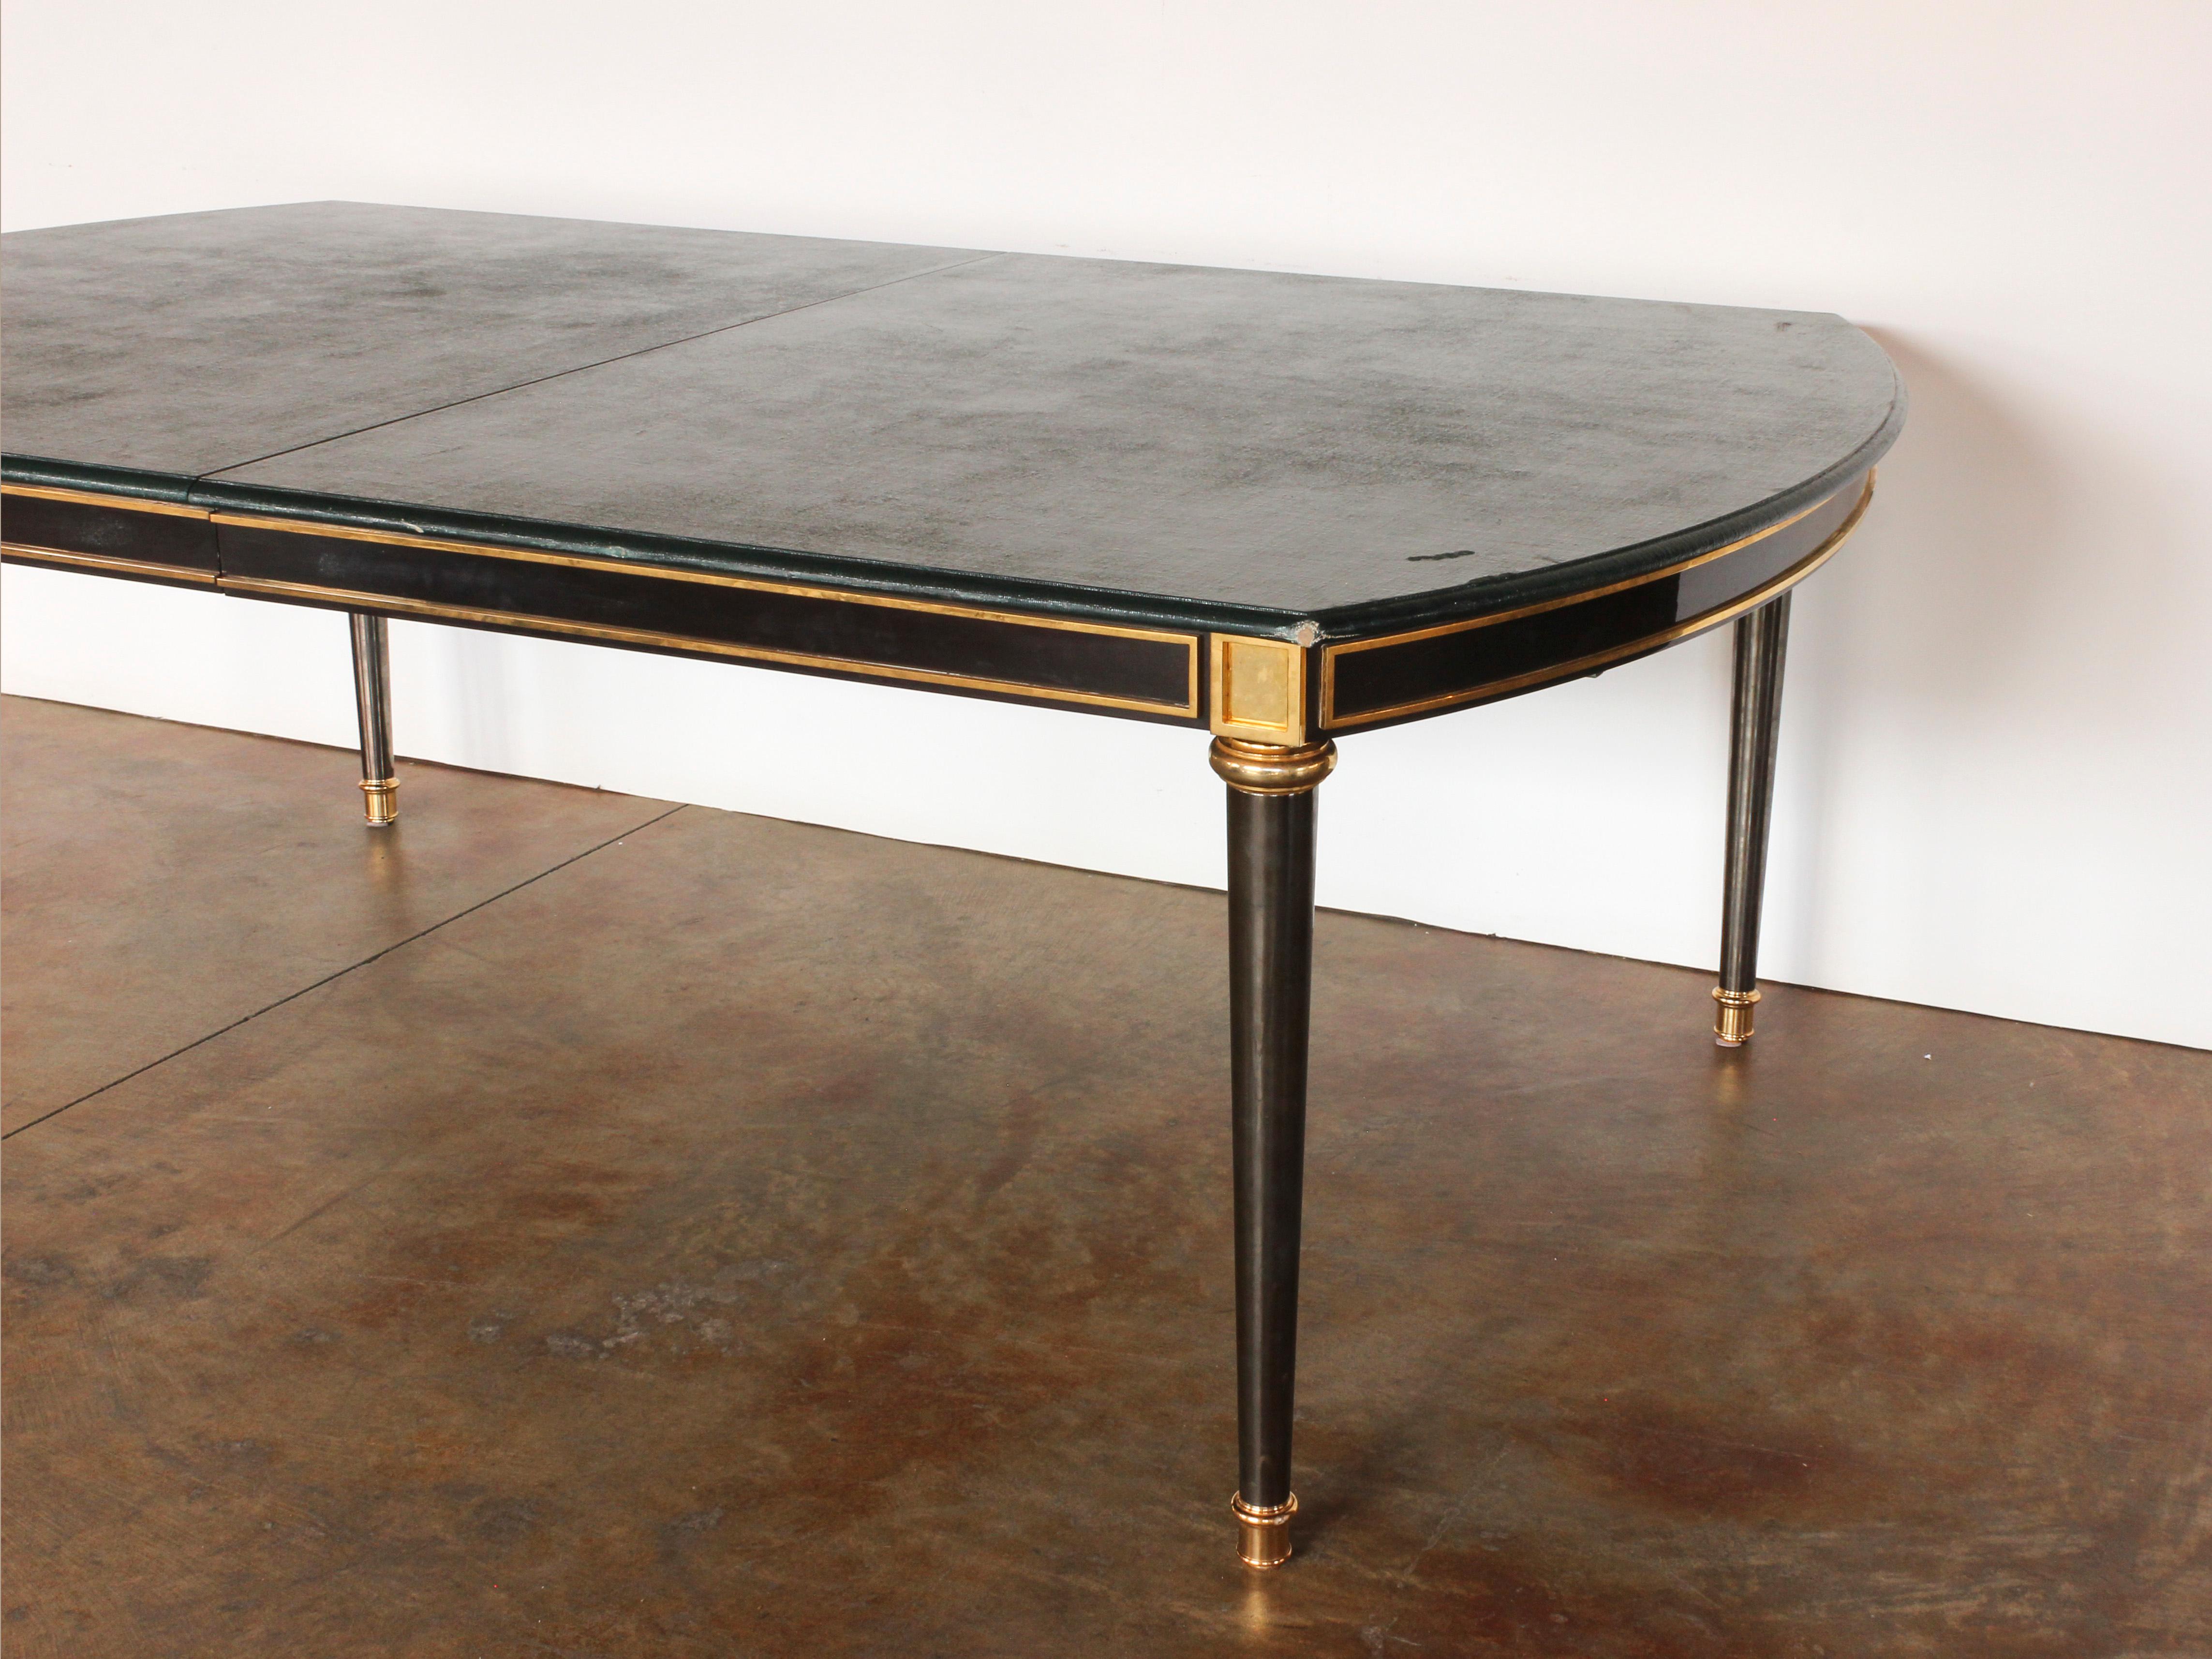 Late 19th/Early 20th Century Neoclassical Style Gilt-Bronze-Mounted Dining Table For Sale 7